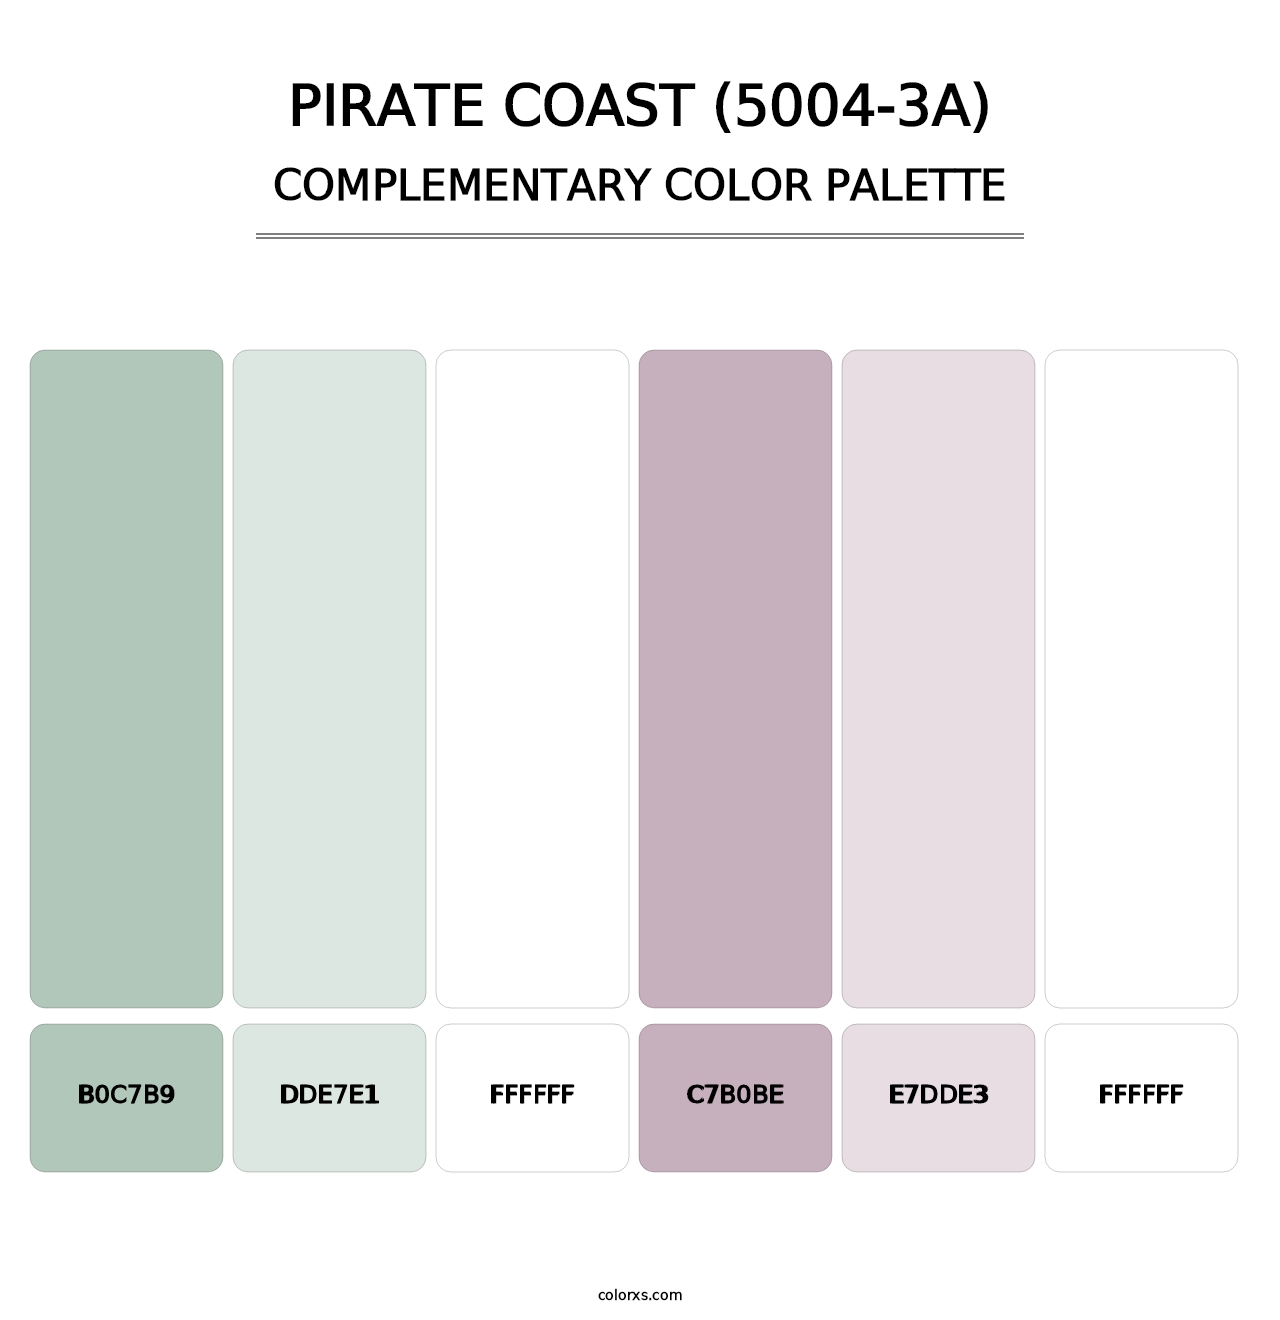 Pirate Coast (5004-3A) - Complementary Color Palette